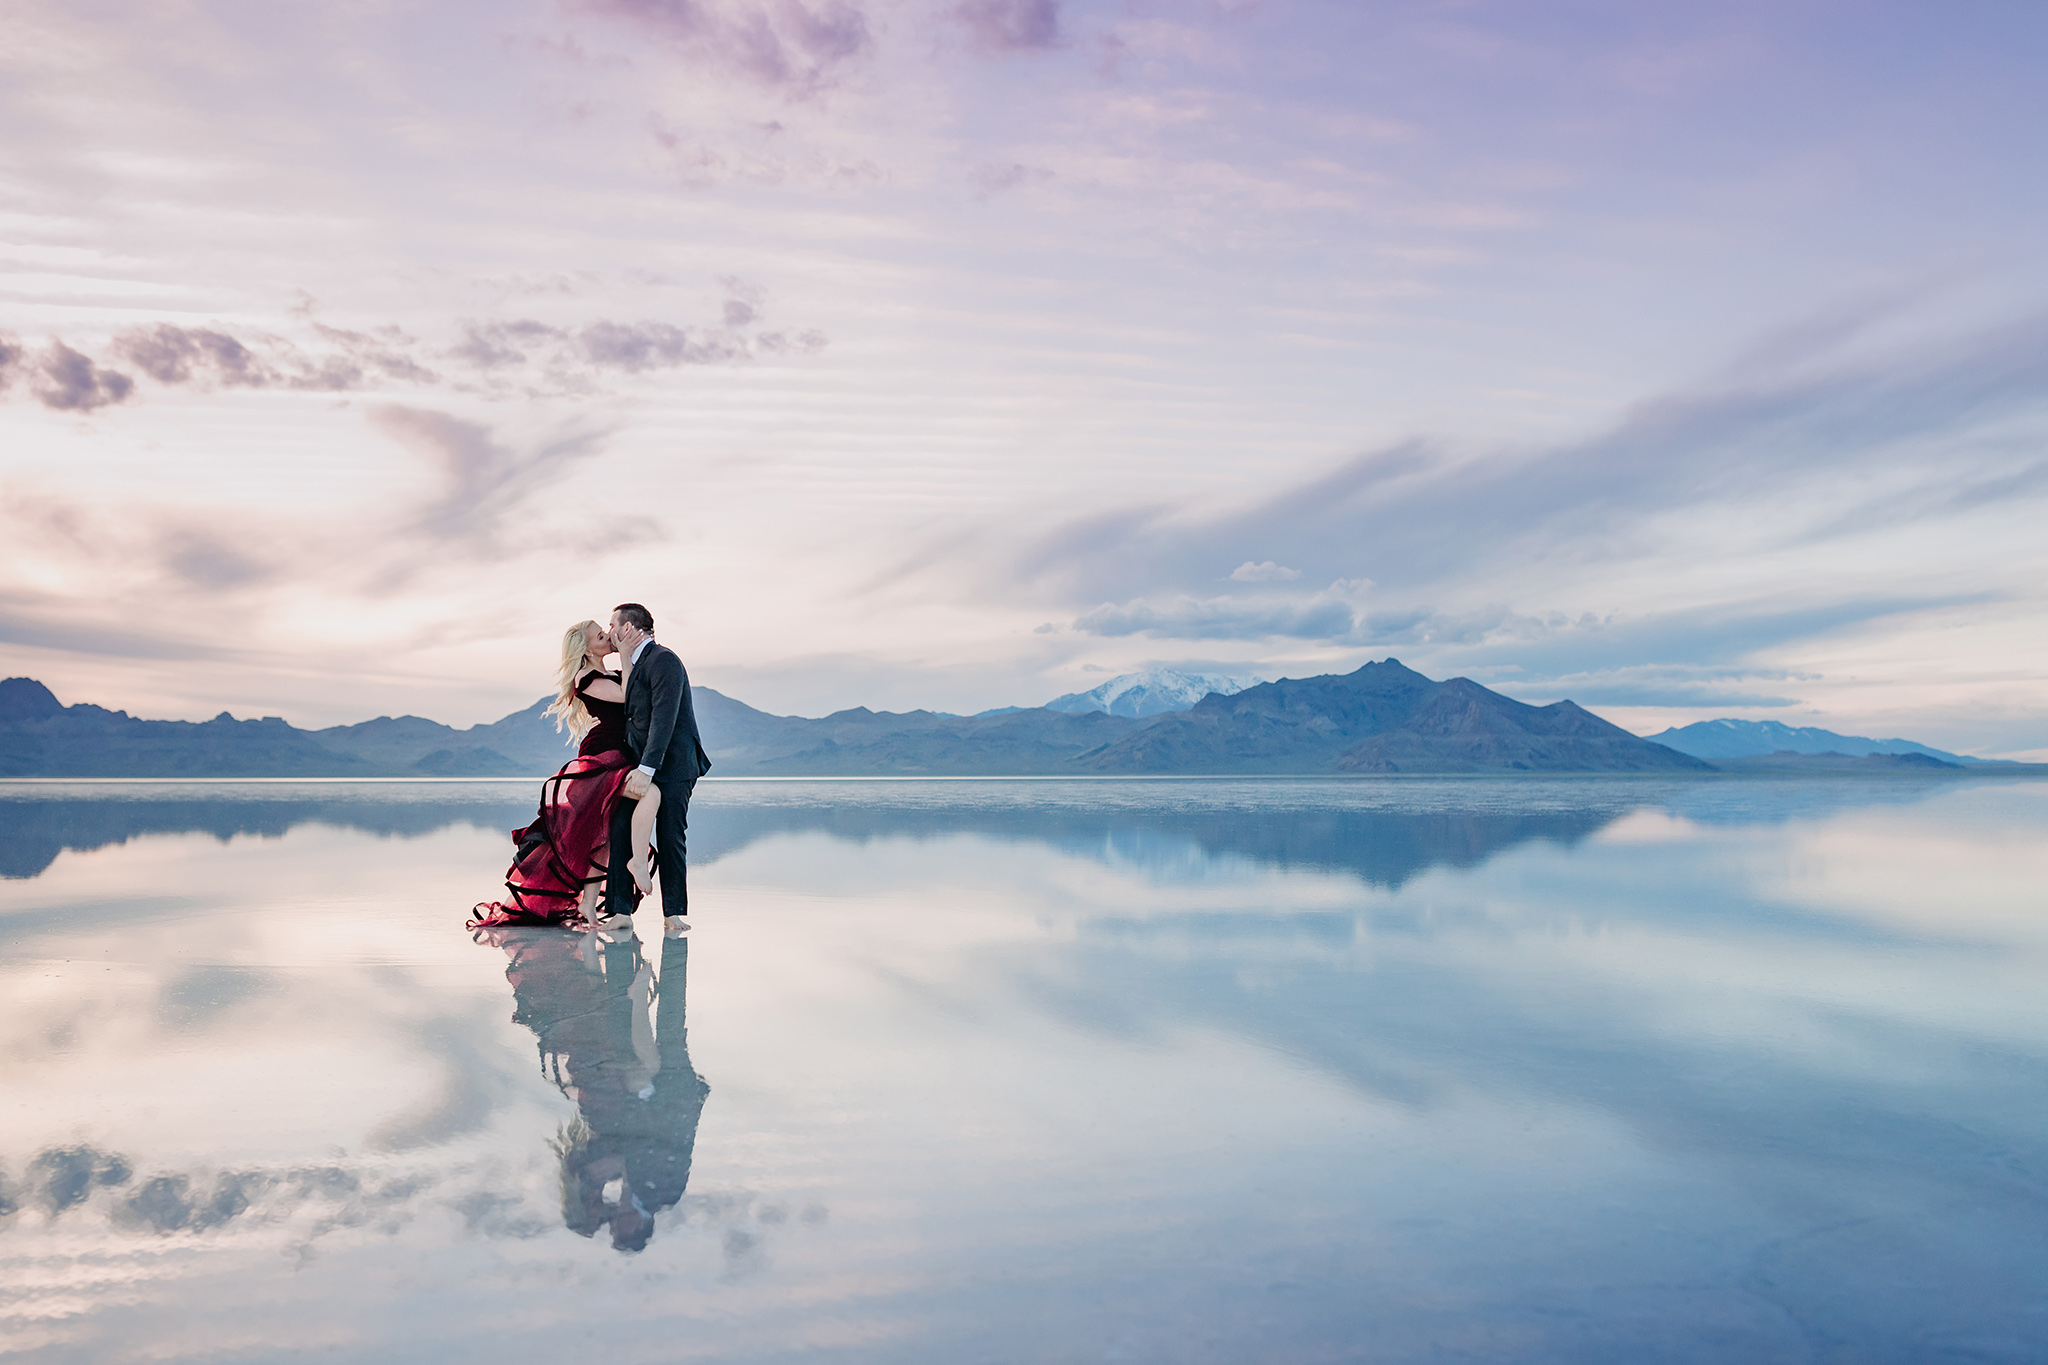 dancing in the water mirror reflections mountain views at sunset in Utah Bonneville Salt Flats